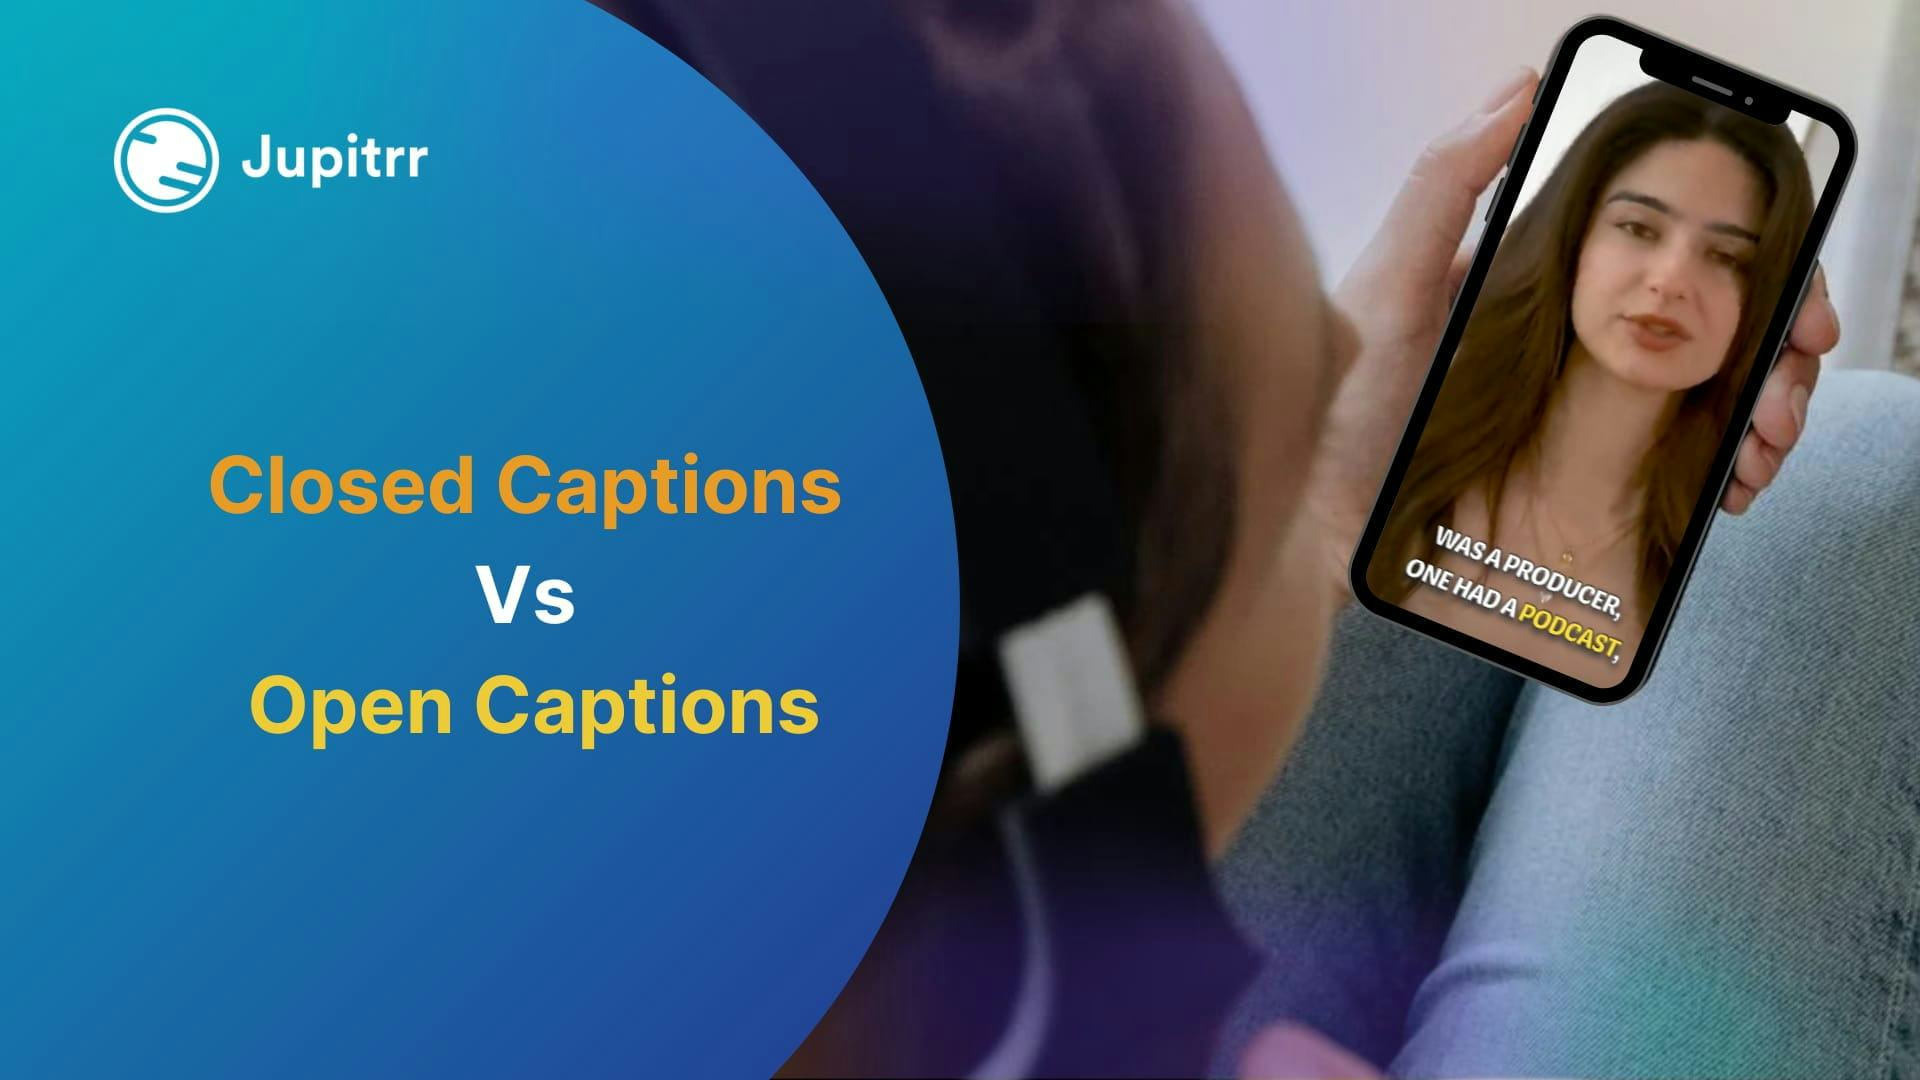 Closed Captions vs Open Captions - How are they different?